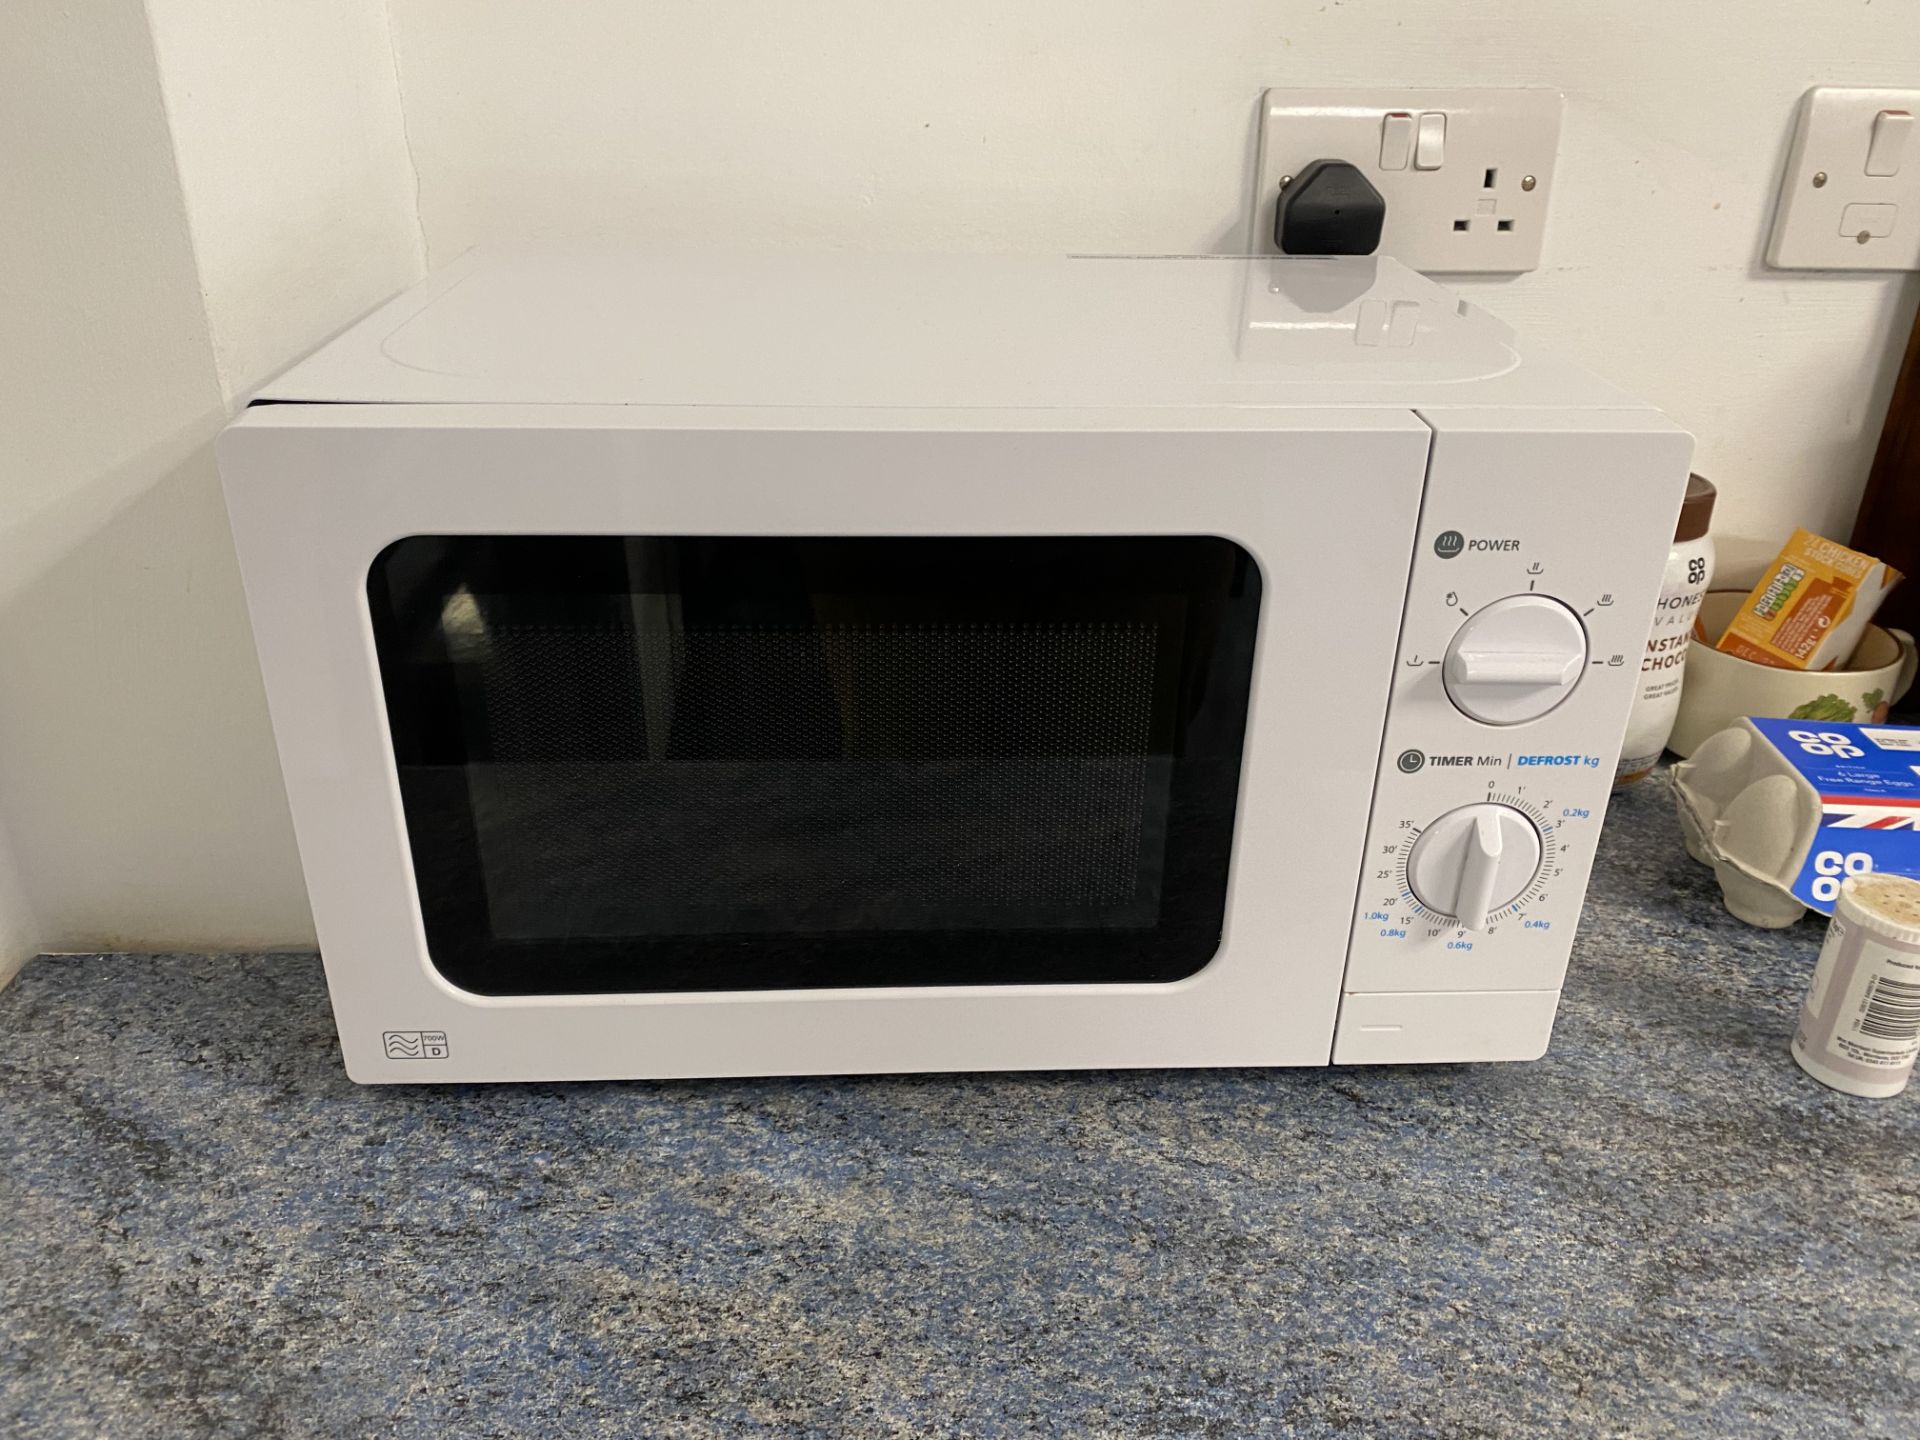 Undercounter refrigerator (unbranded), microwave (unbranded) - Image 2 of 3